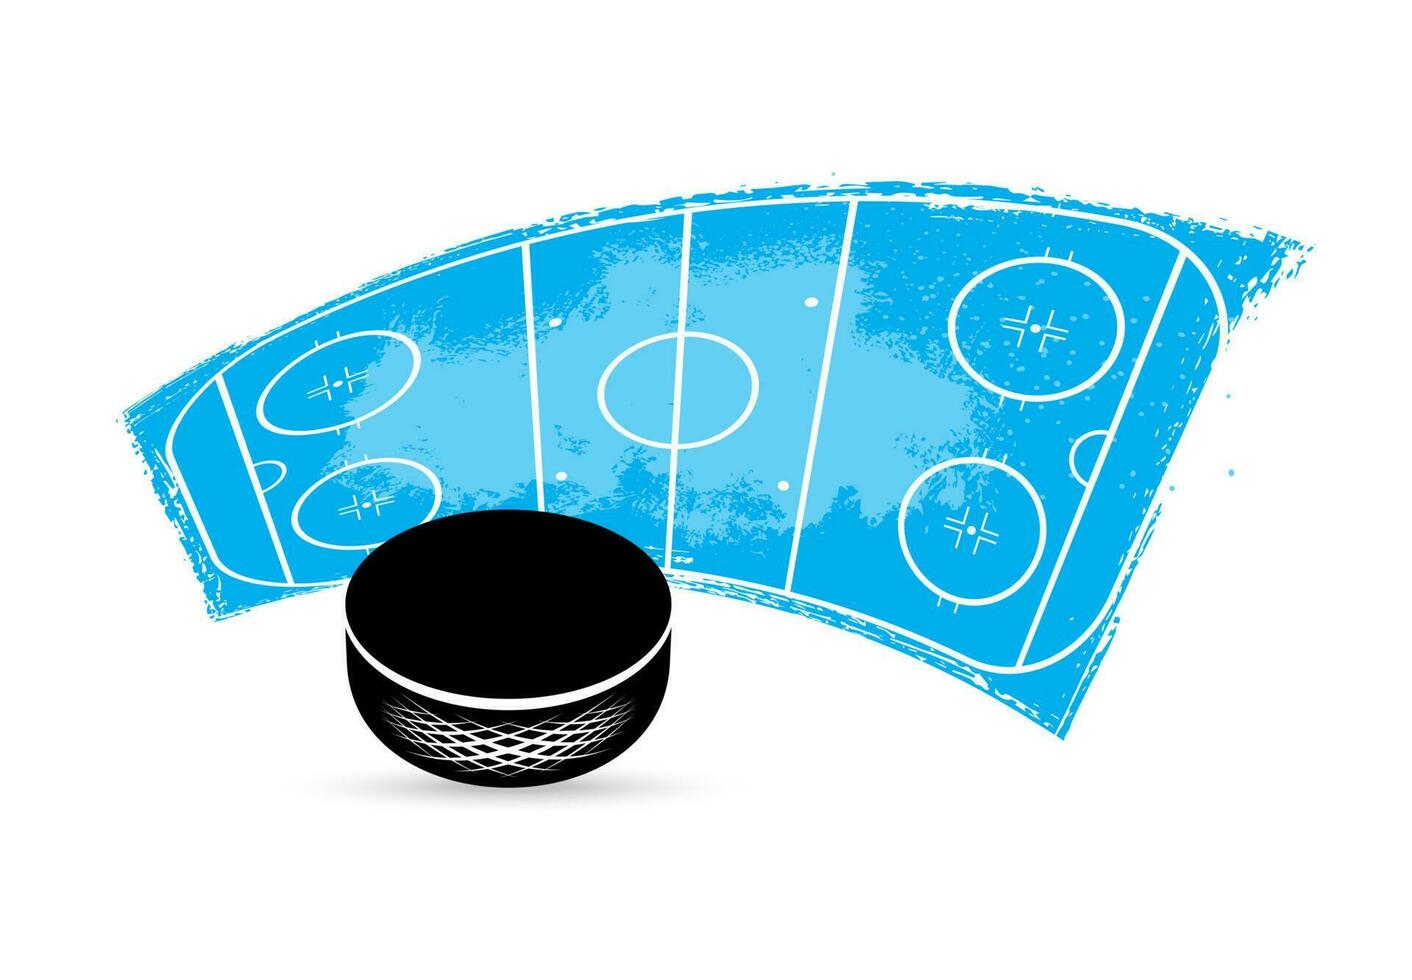 Ice hockey tournament, puck and rink grungy icon vector